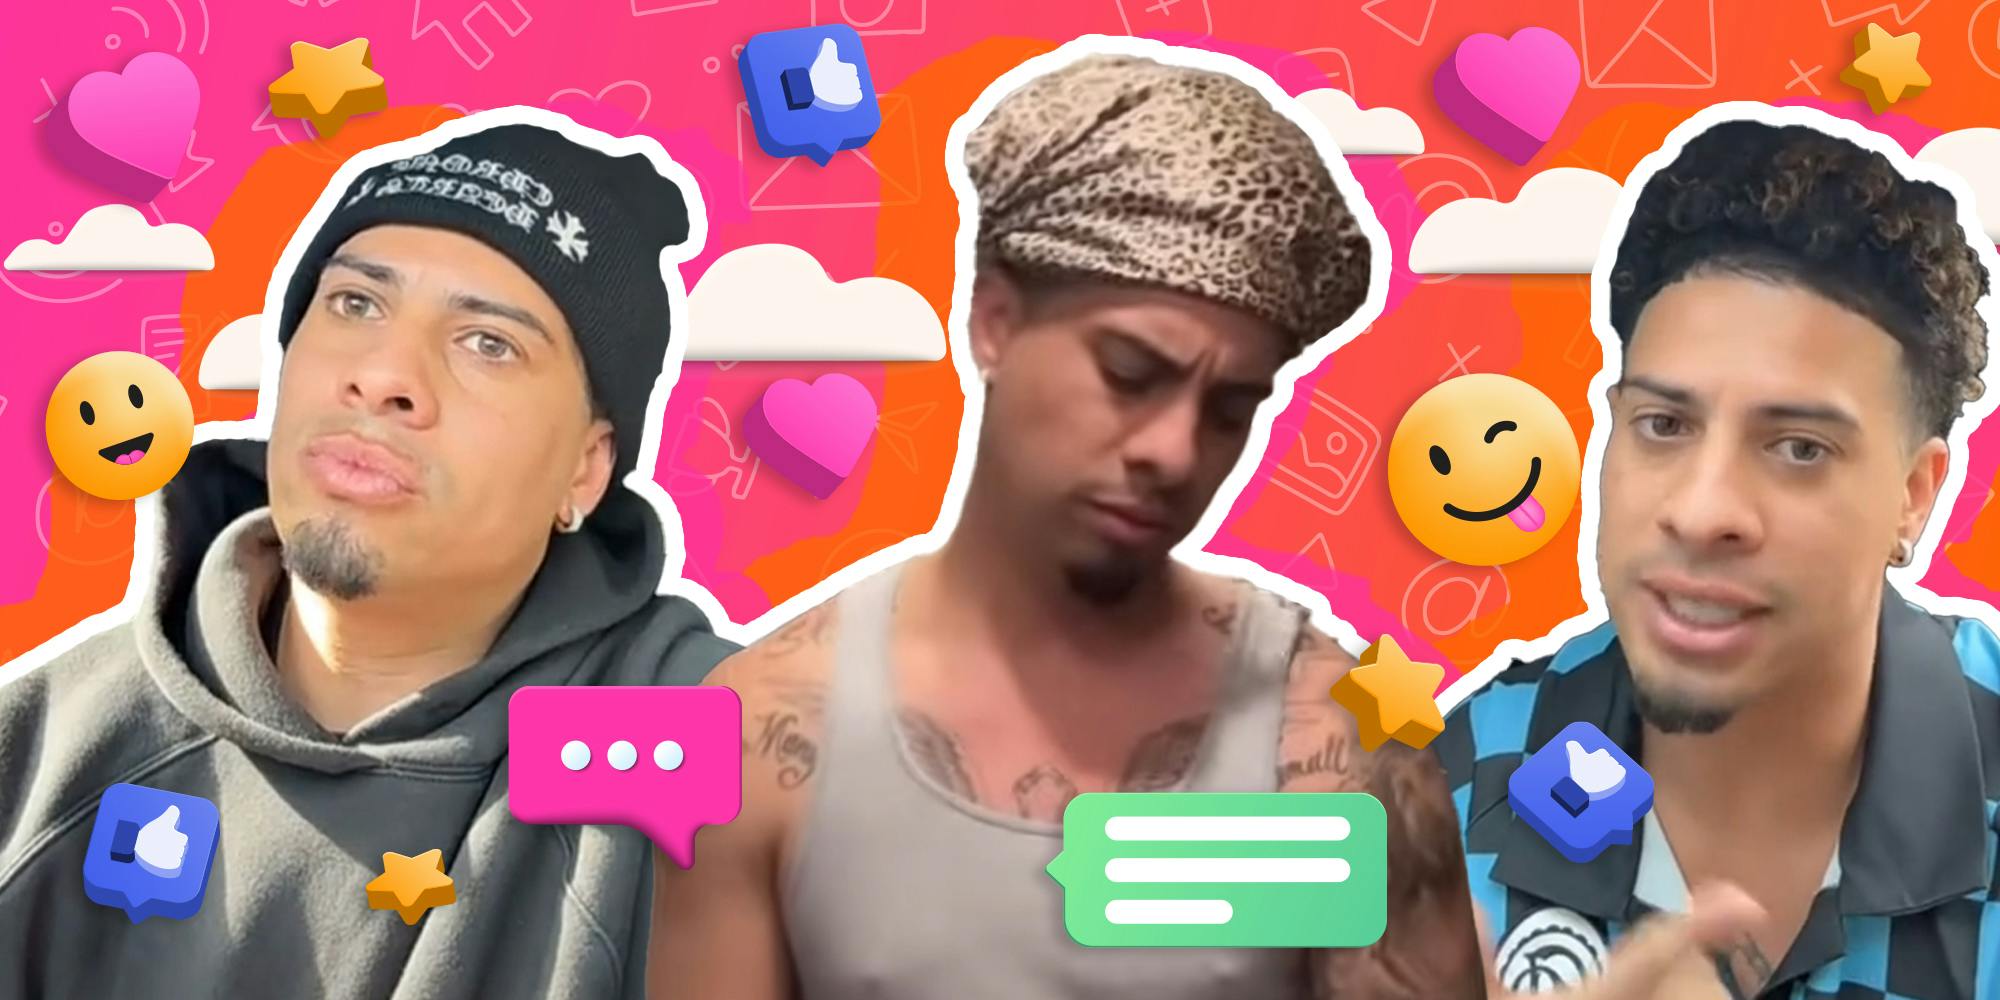 What’s Going on With Austin McBroom?